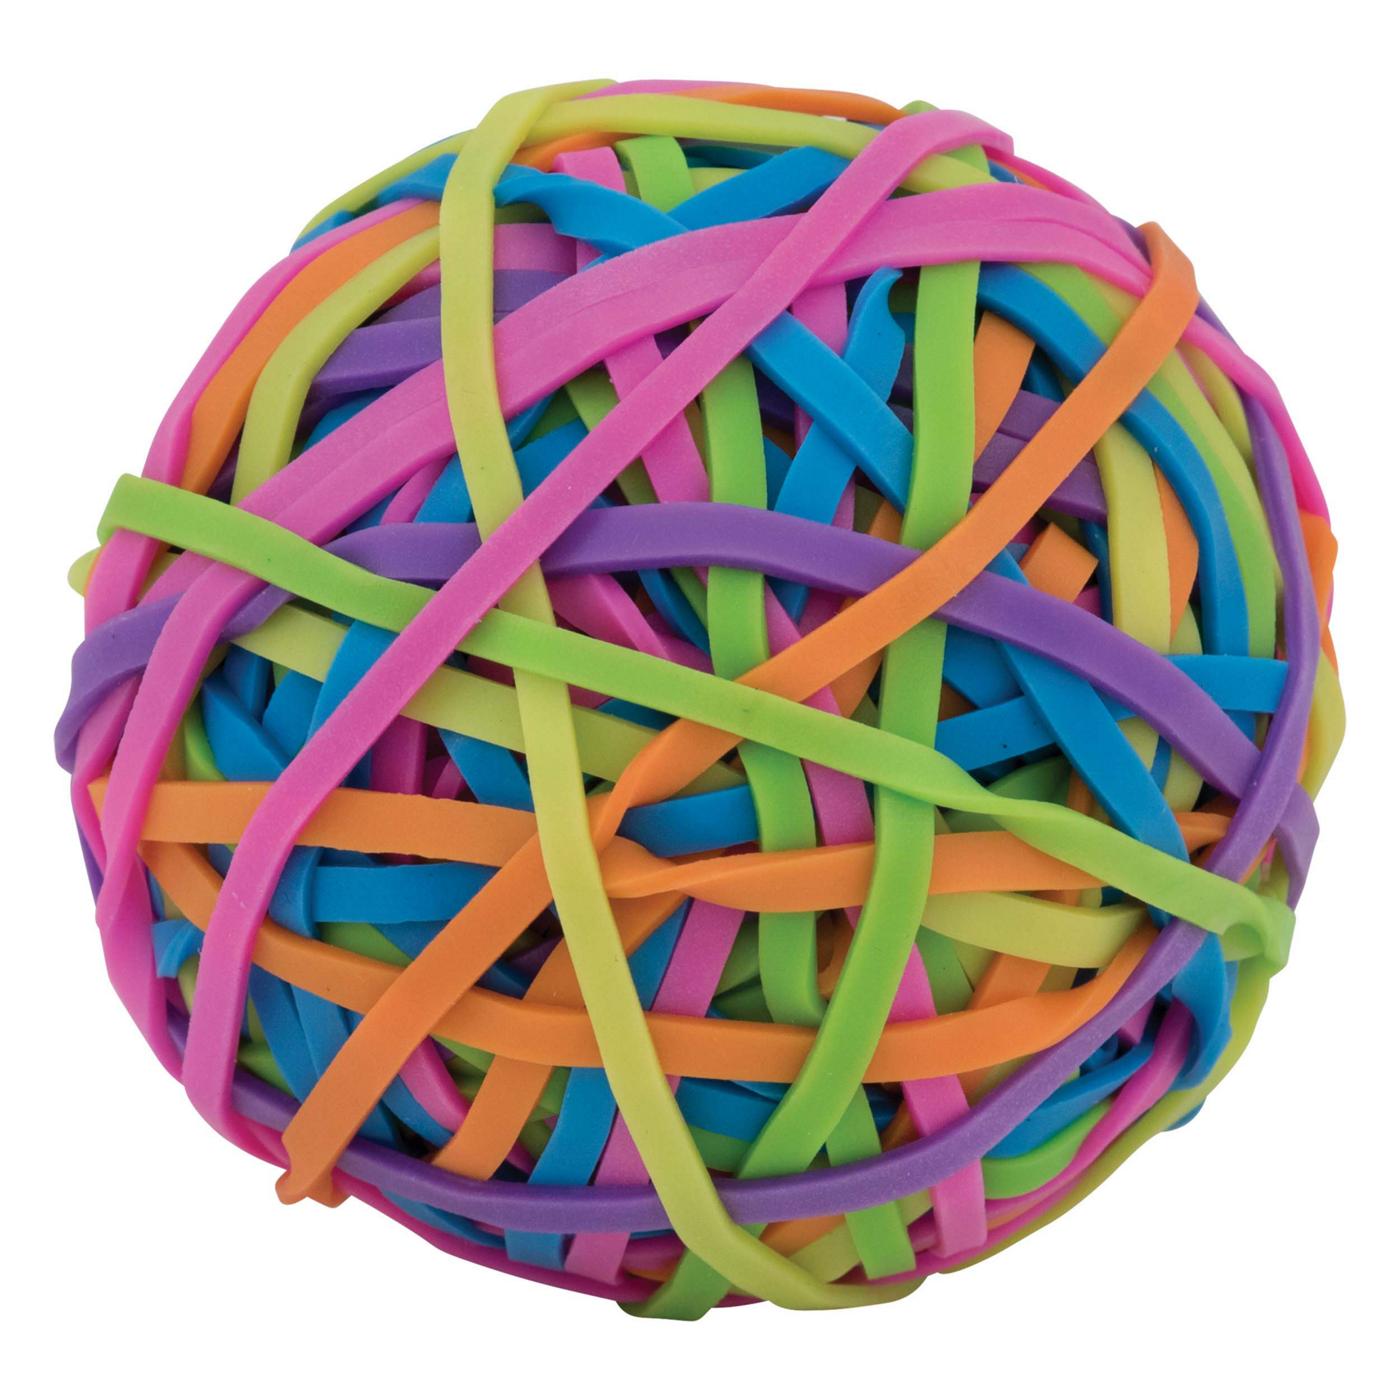 Office Logic Rubber Band Ball; image 1 of 2